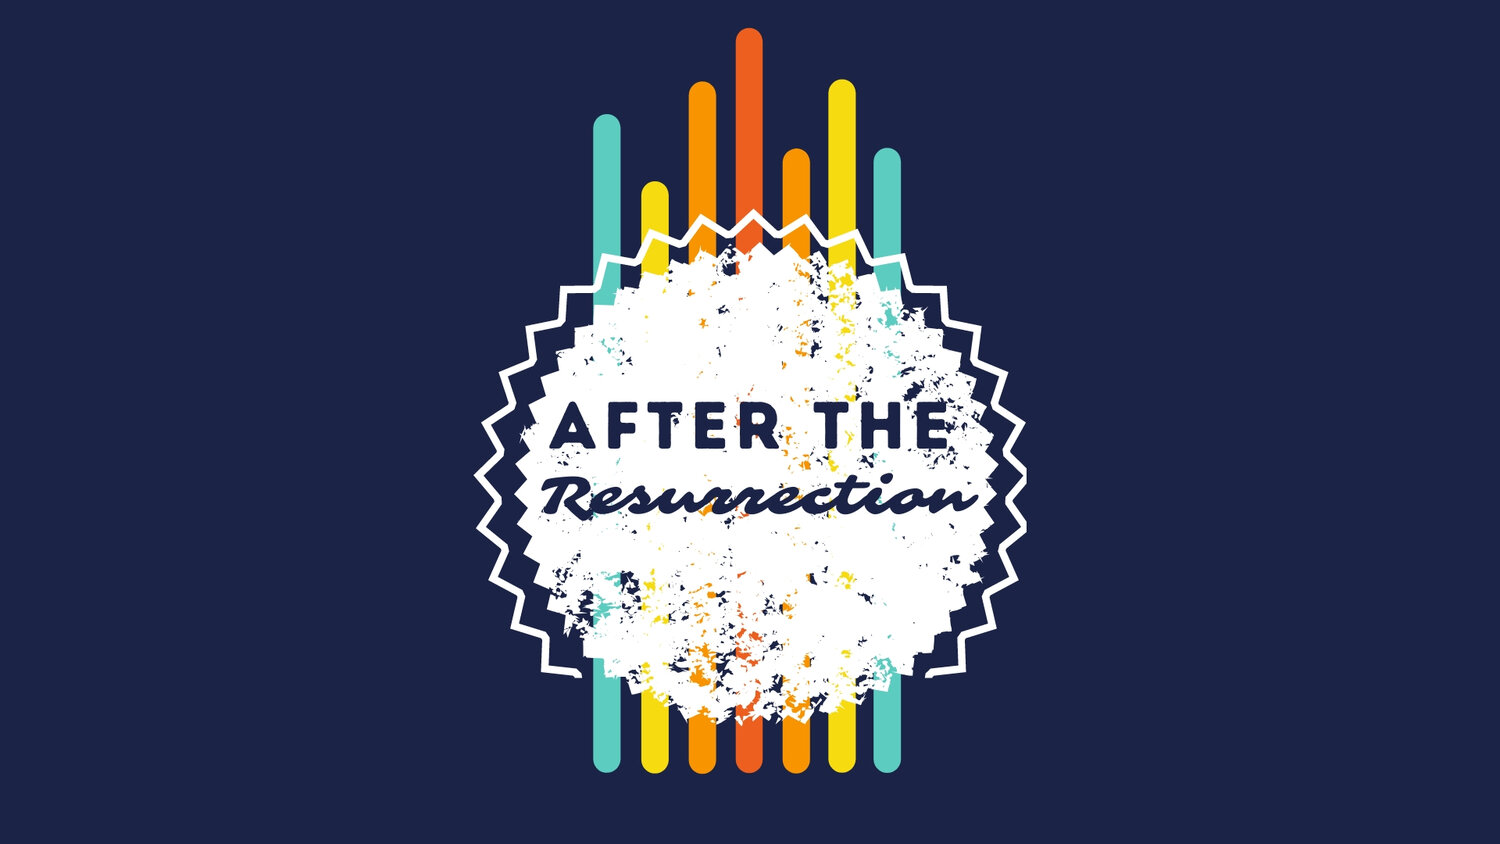 After the resurrection